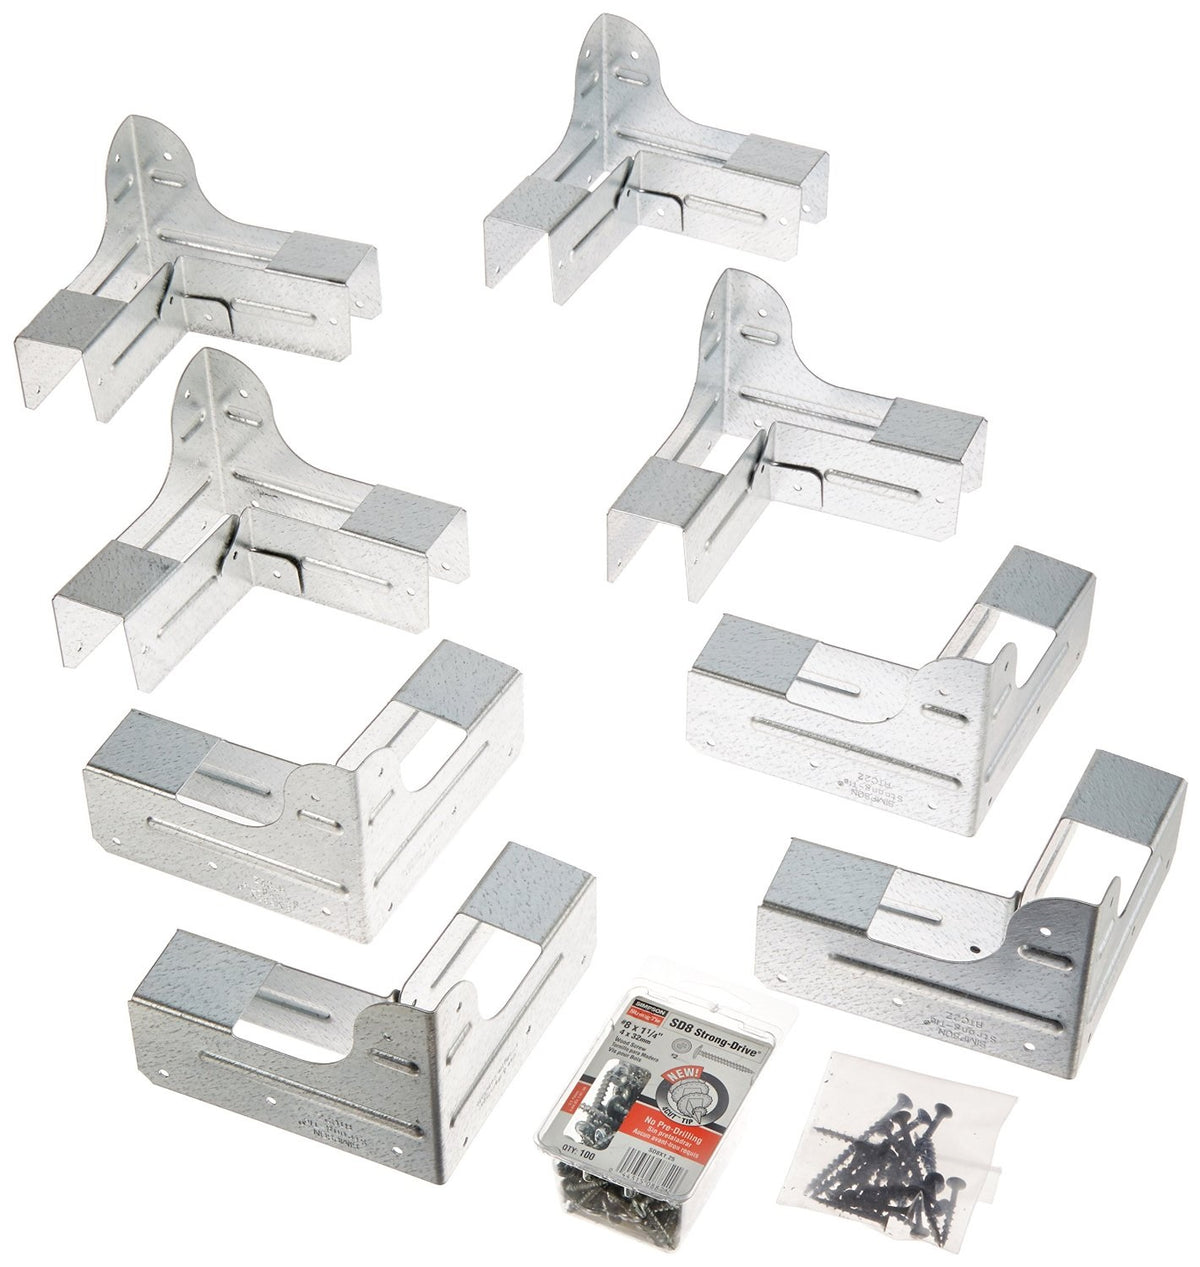 Buy wbsk workbench and shelving hardware kit - Online store for joist hangers & connectors, metal connectors in USA, on sale, low price, discount deals, coupon code